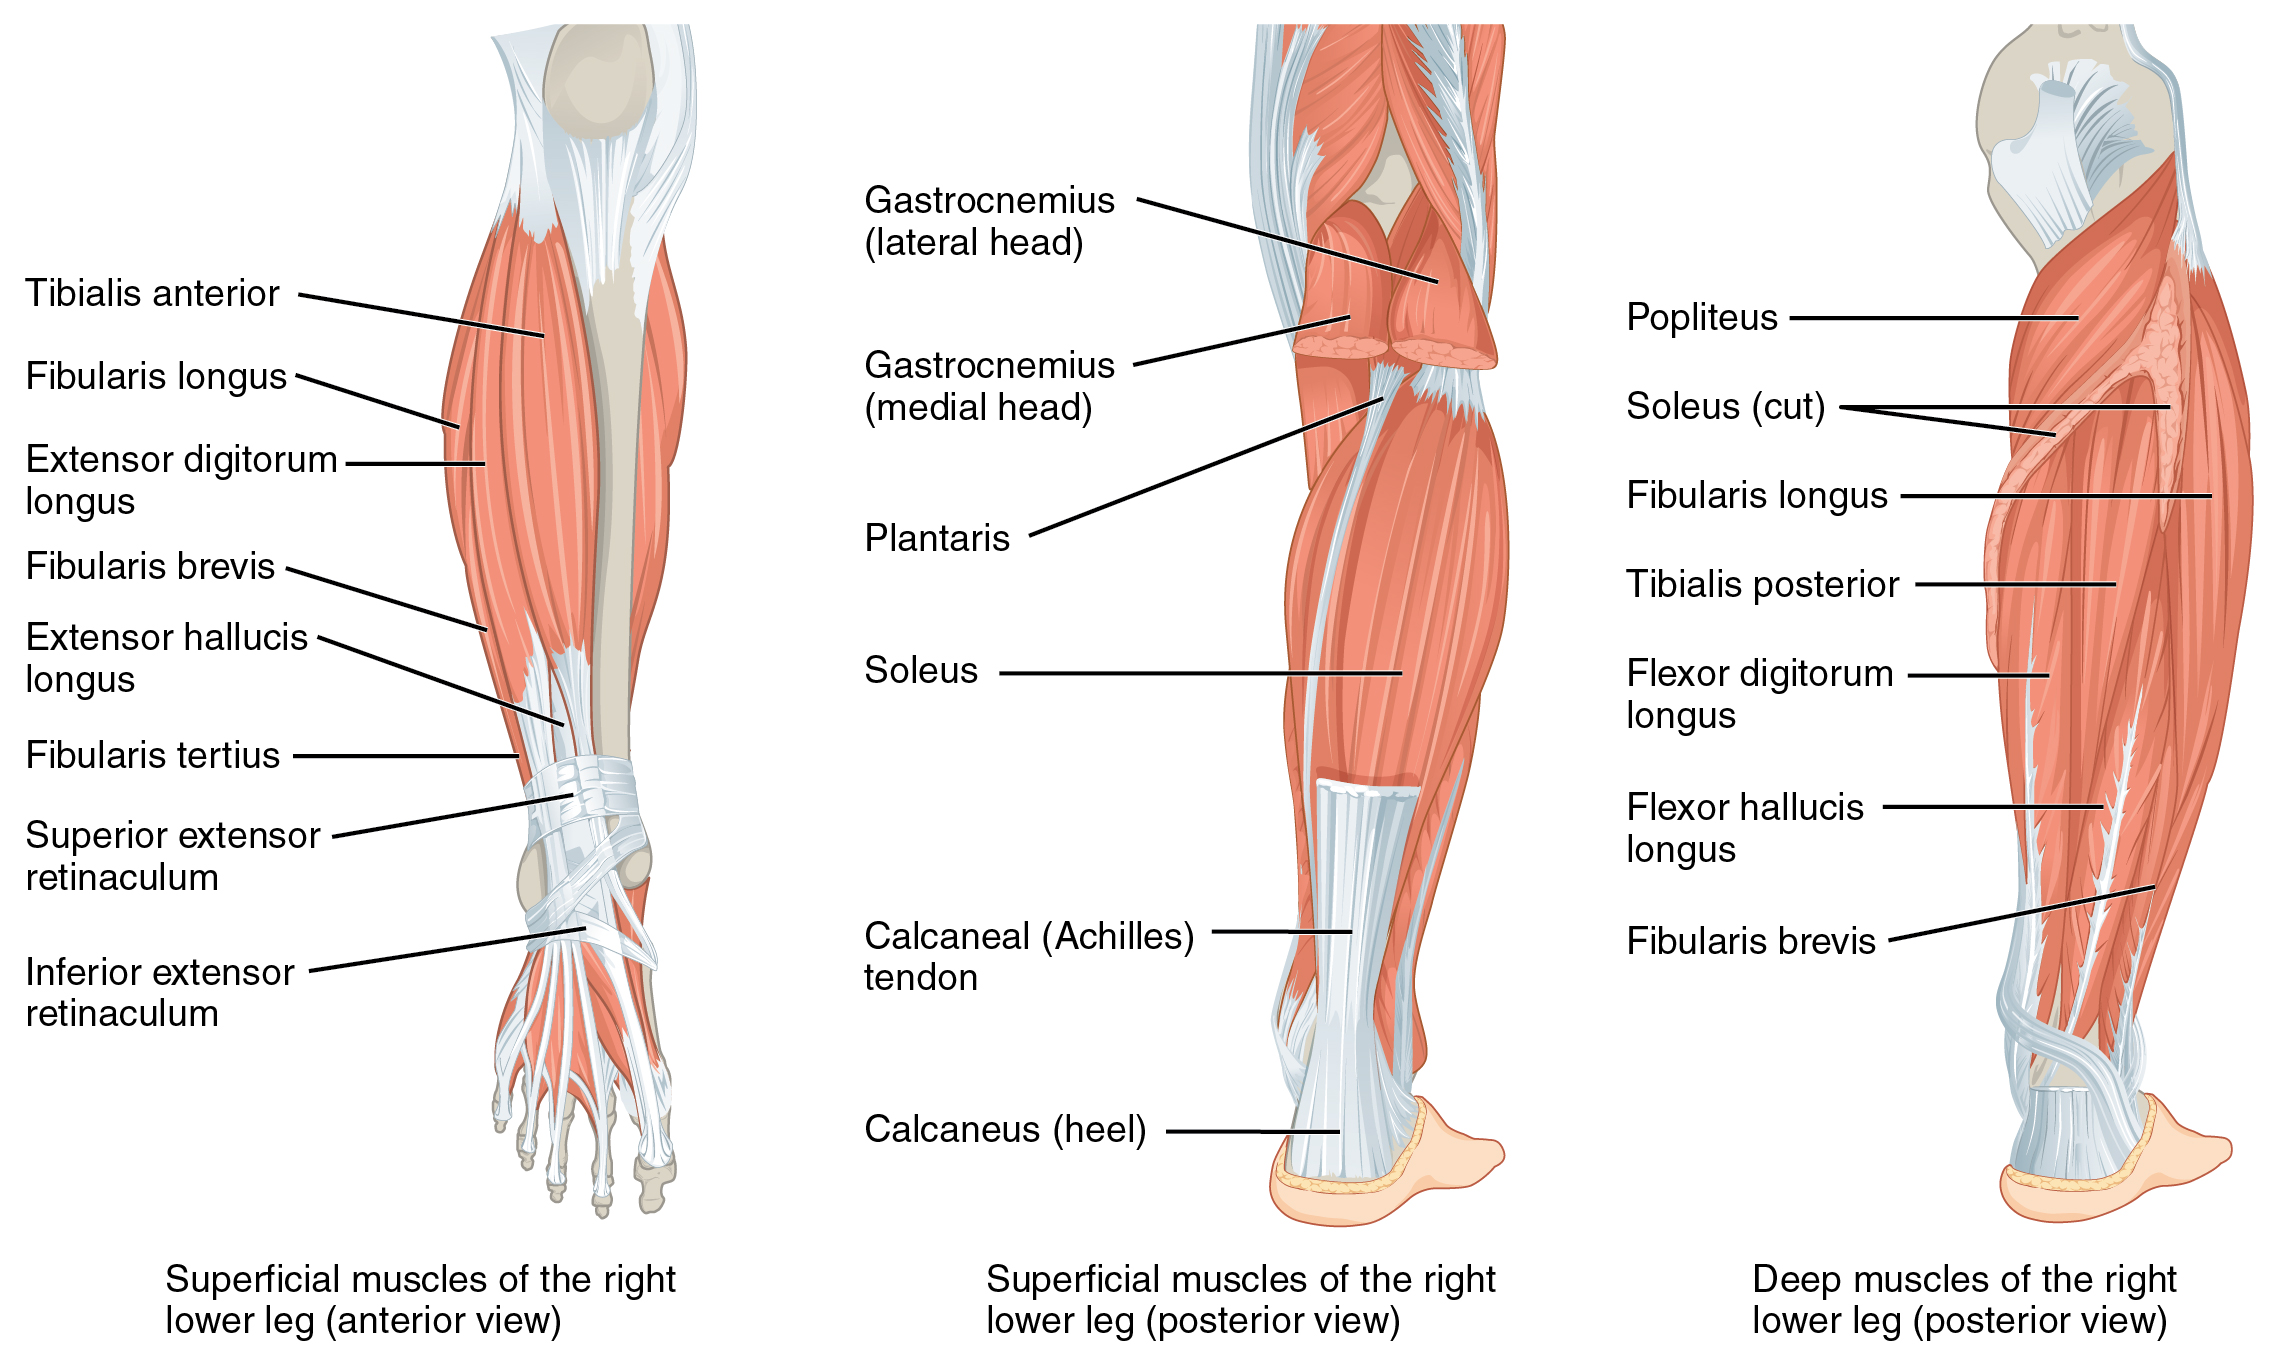 1123_Muscles_of_the_Leg_that_Move_the_Foot_and_Toes.jpg